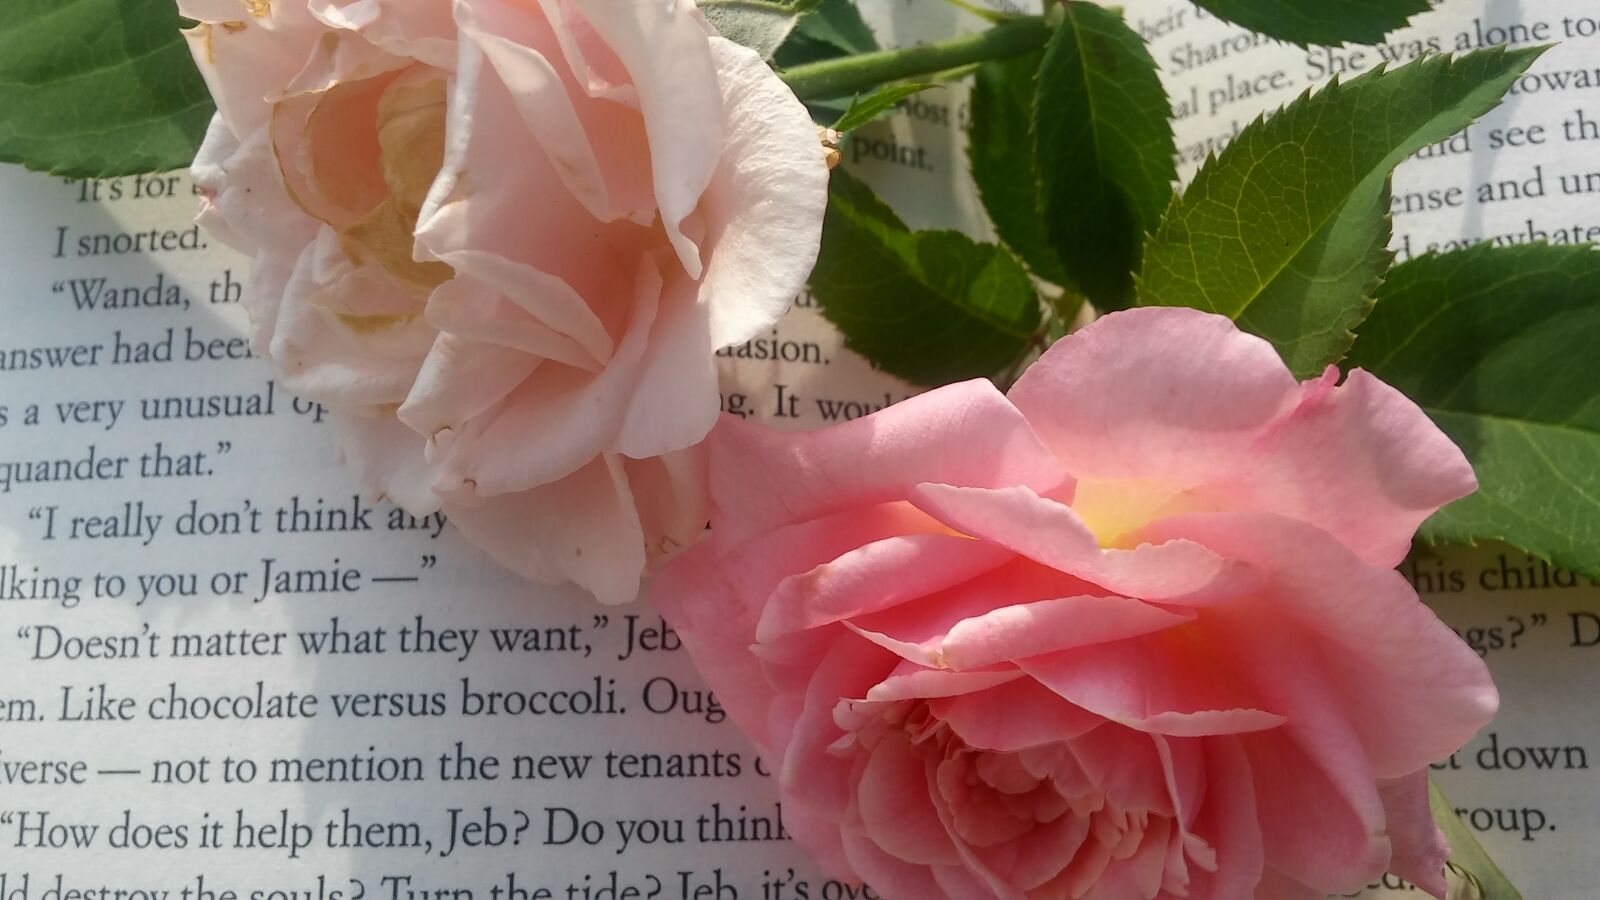 LG G STYLO sample photo. Two roses, book, pink photography